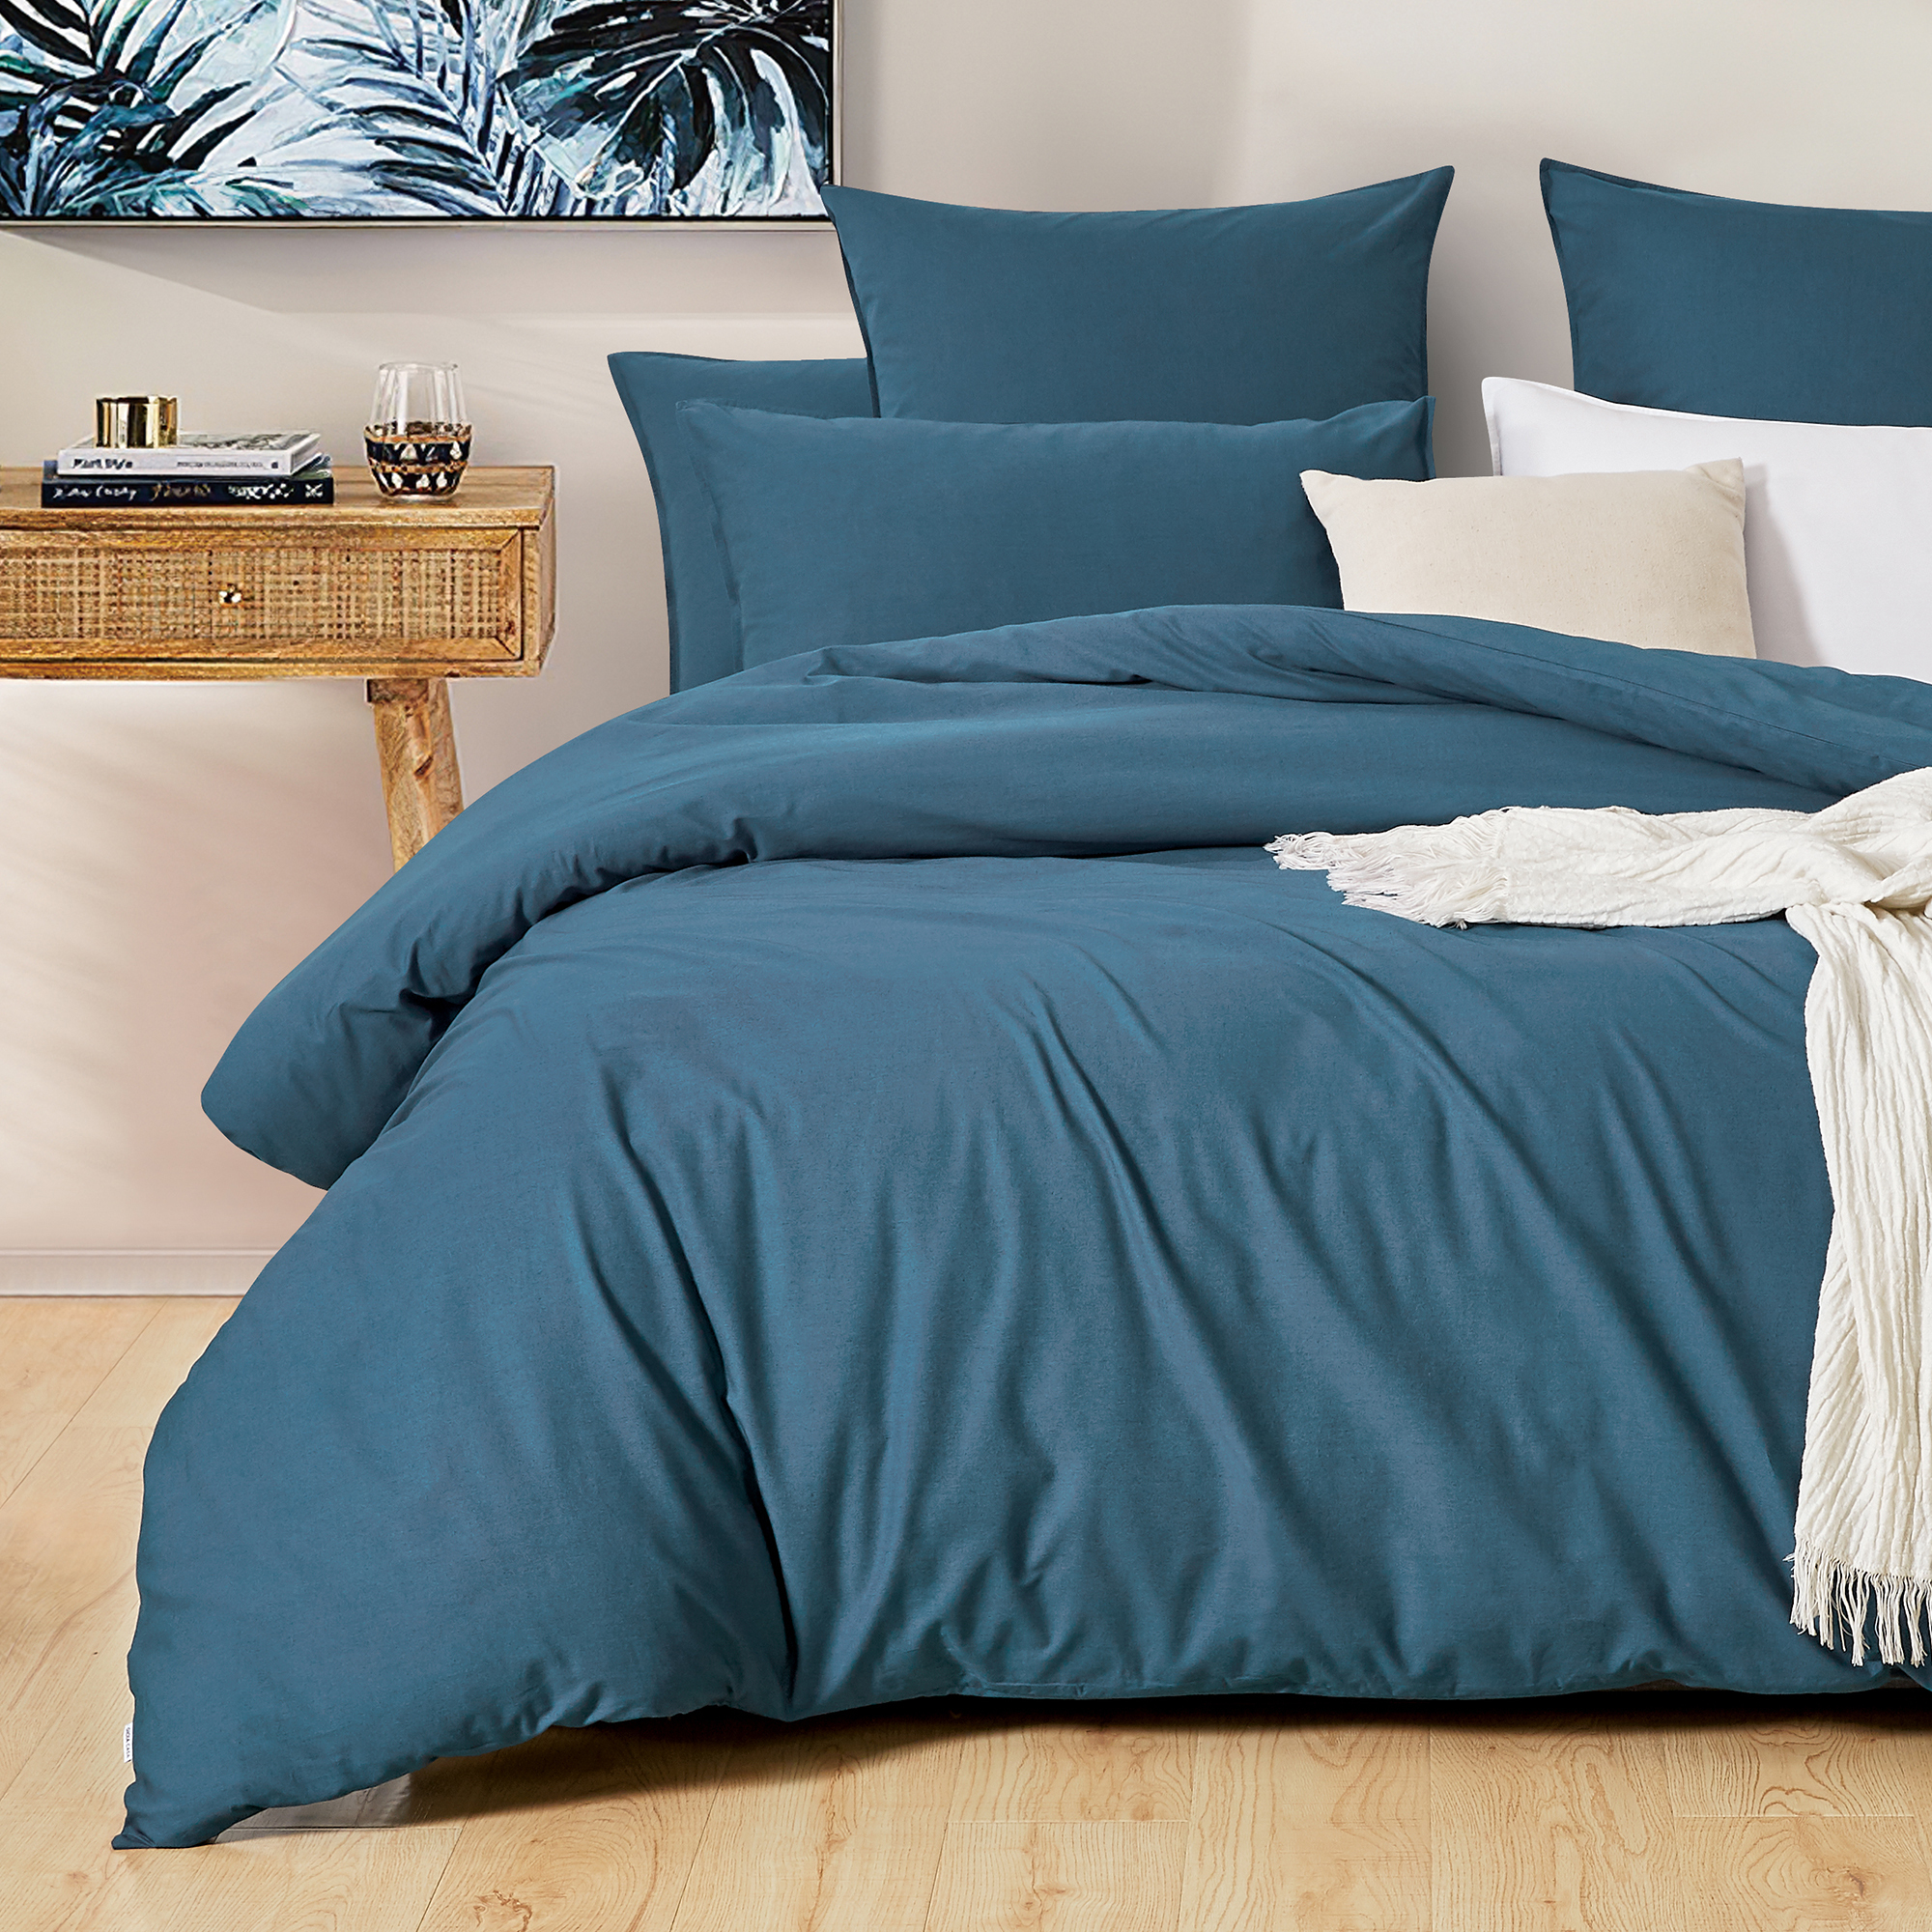 Gioia Casa Teal Vintage Washed Cotton, Teal Washed Cotton Duvet Cover